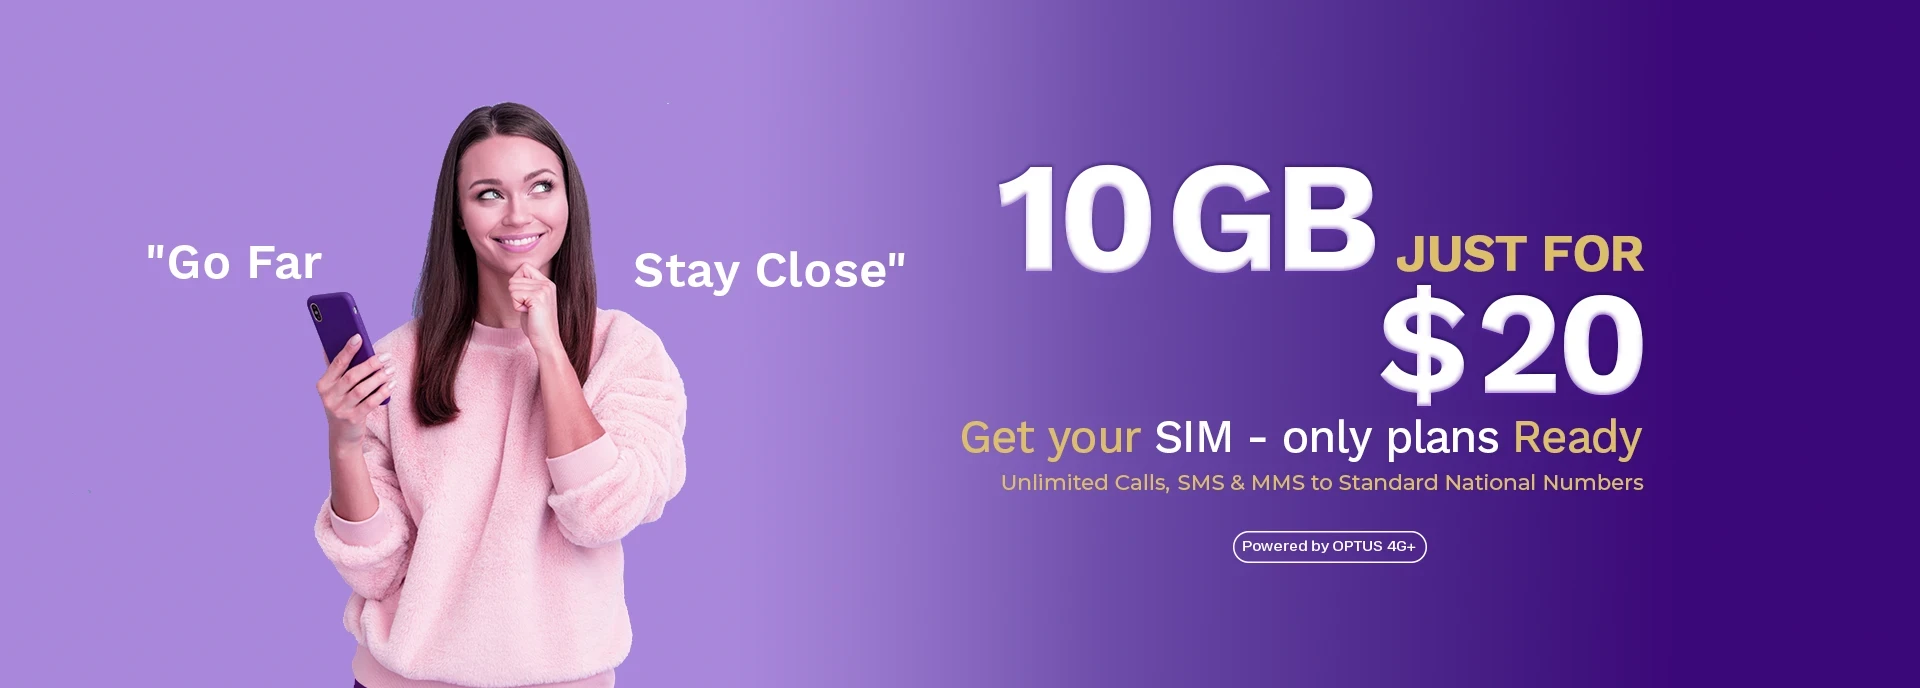 10GB Crown mobile